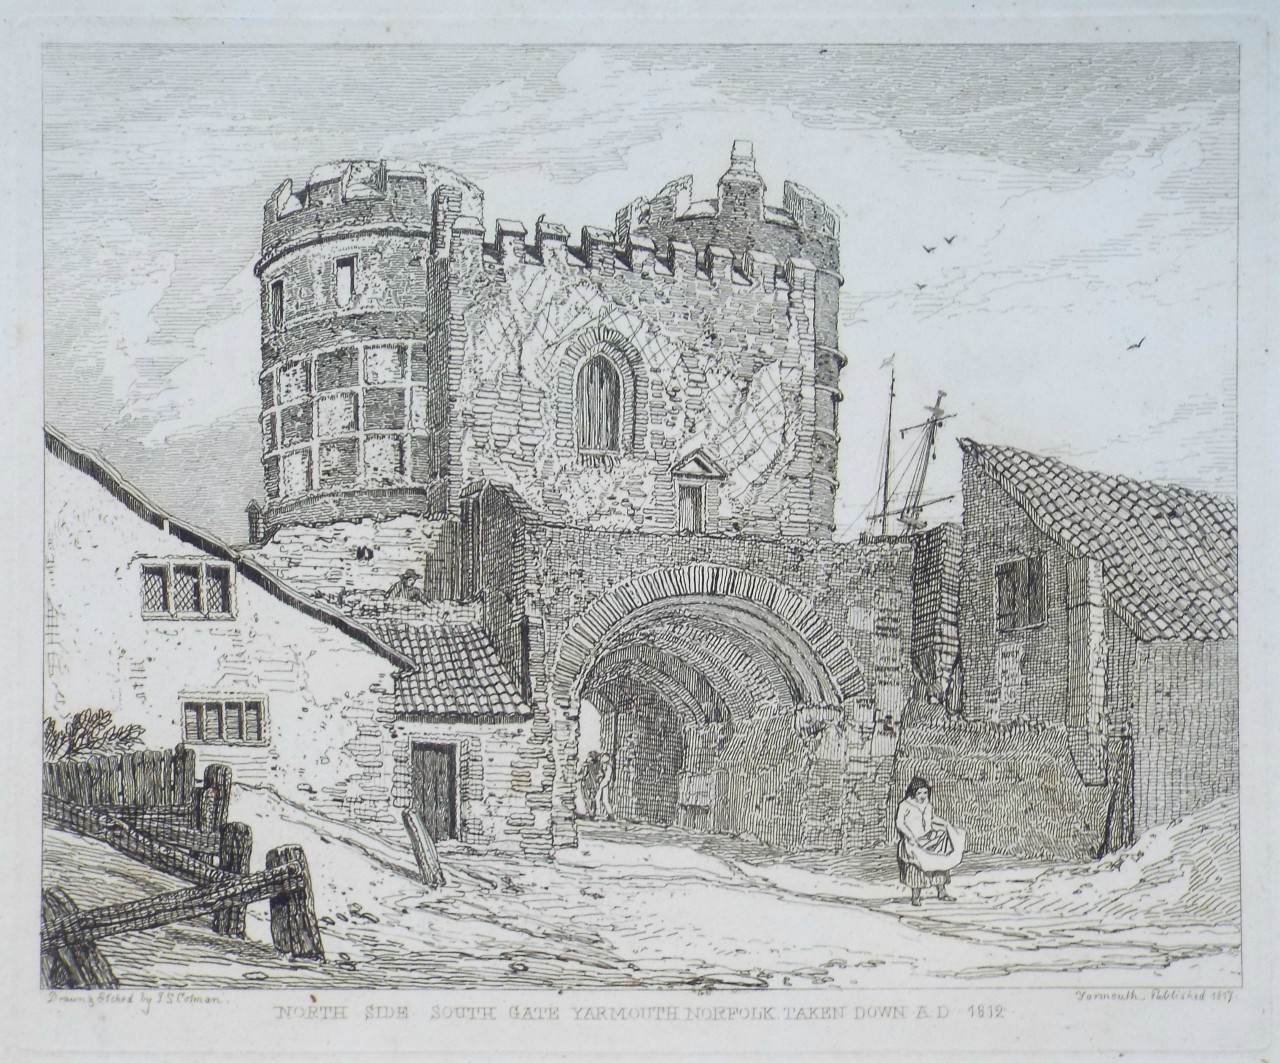 Etching - North Side South Gate Yarmouth Norfolk Taken Down  A D 1812 - Cotman